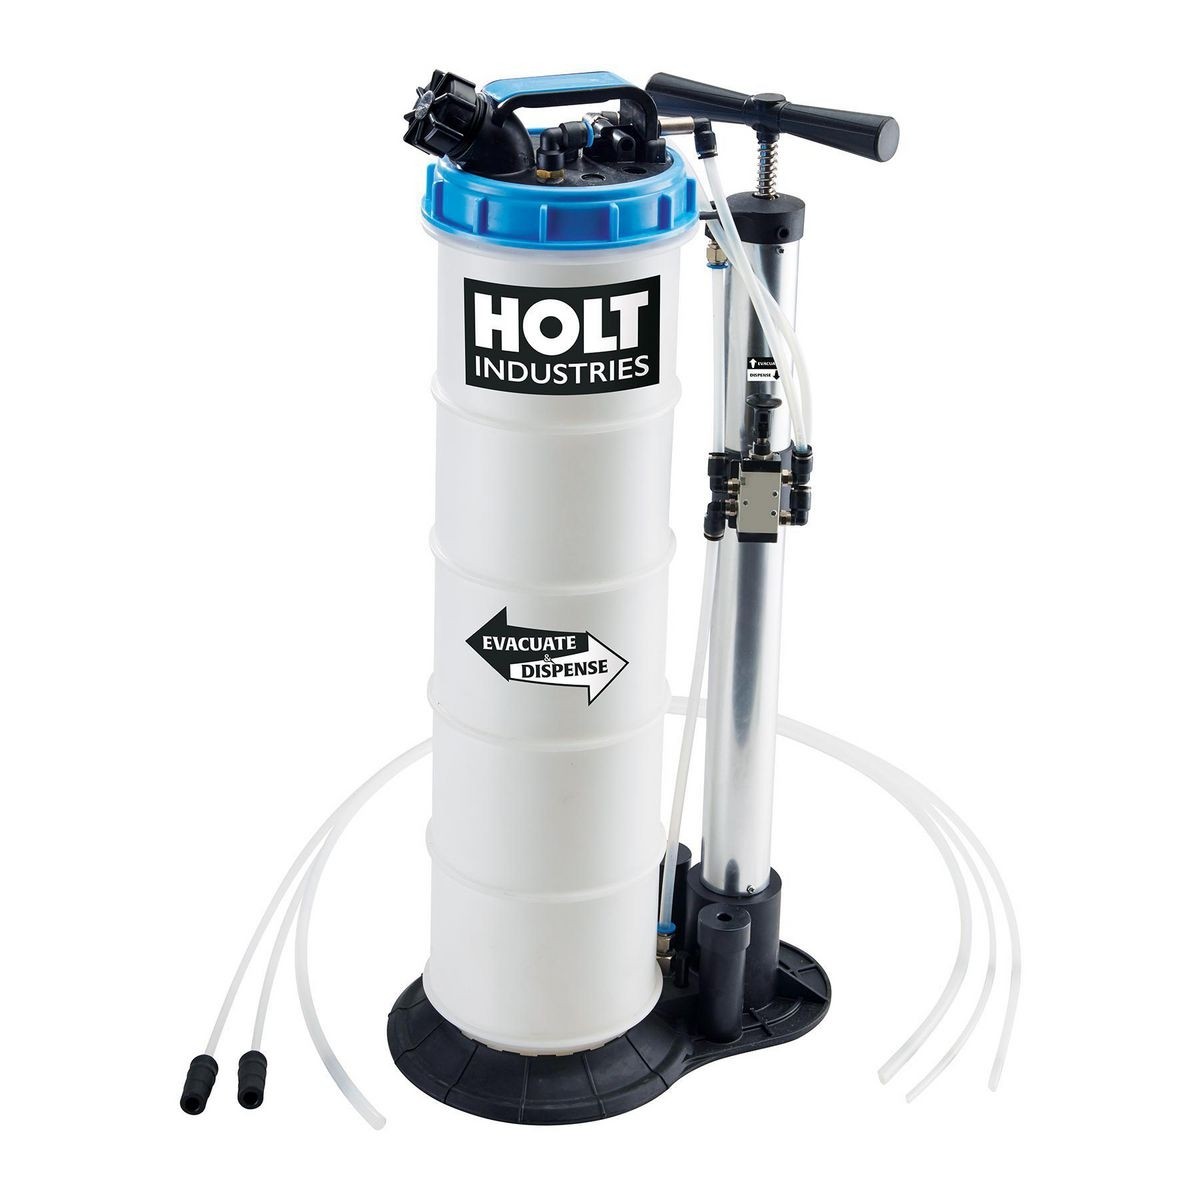 HOLT INDUSTRIES Deluxe Manual Fluid Extractor and Dispenser – Item